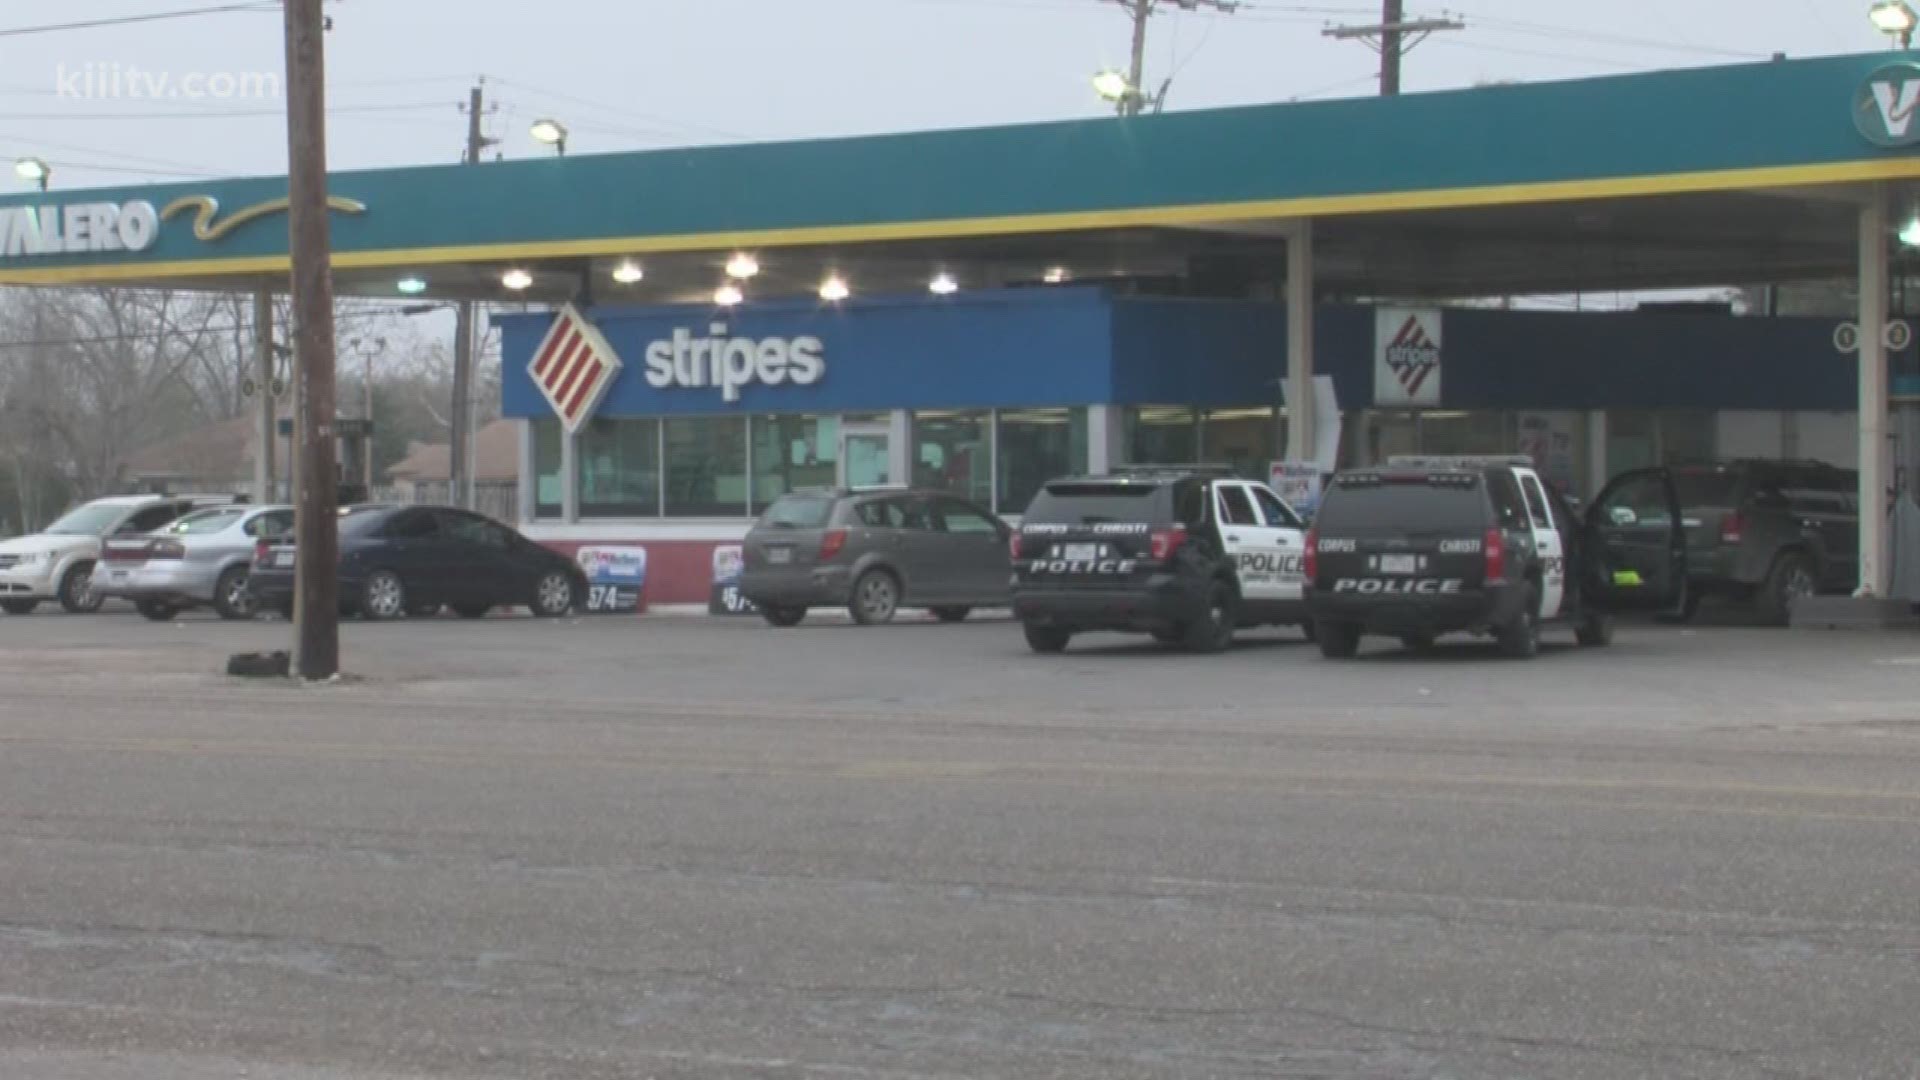 Corpus Christi Police investigating a kidnapping near the intersection of Ayers and Gollihar have taken at least one suspect into custody. It happened just after 7:30 a.m. after police say the suspect stole a vehicle and took off with several children in the car.